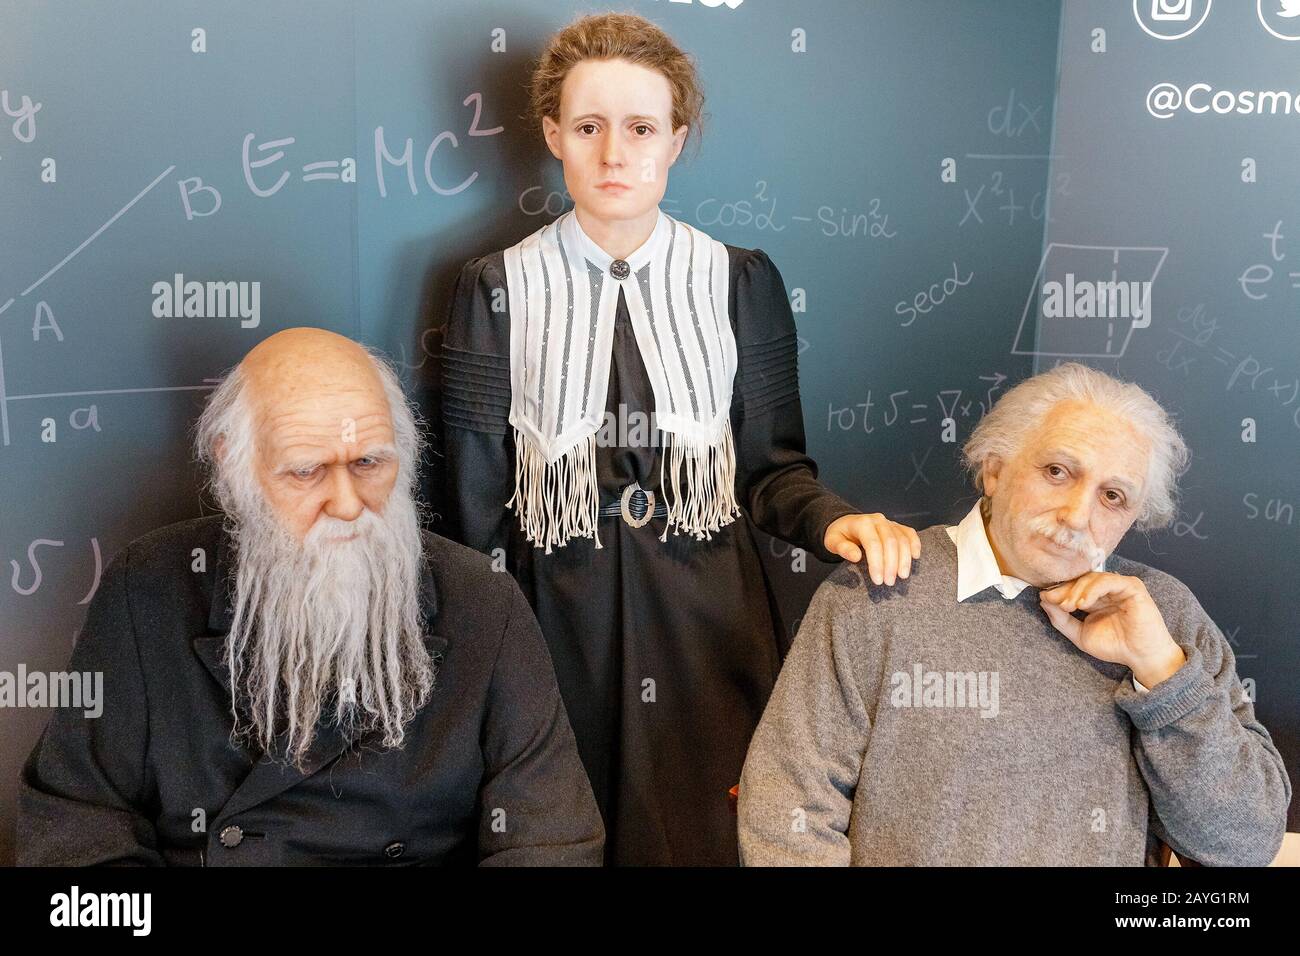 28 JULY 2018, BARCELONA, SPAIN: the wax figure of Albert Einstein, chemist Mendeleev and physicist madame Curie in Cosmocaixa science museum Stock Photo